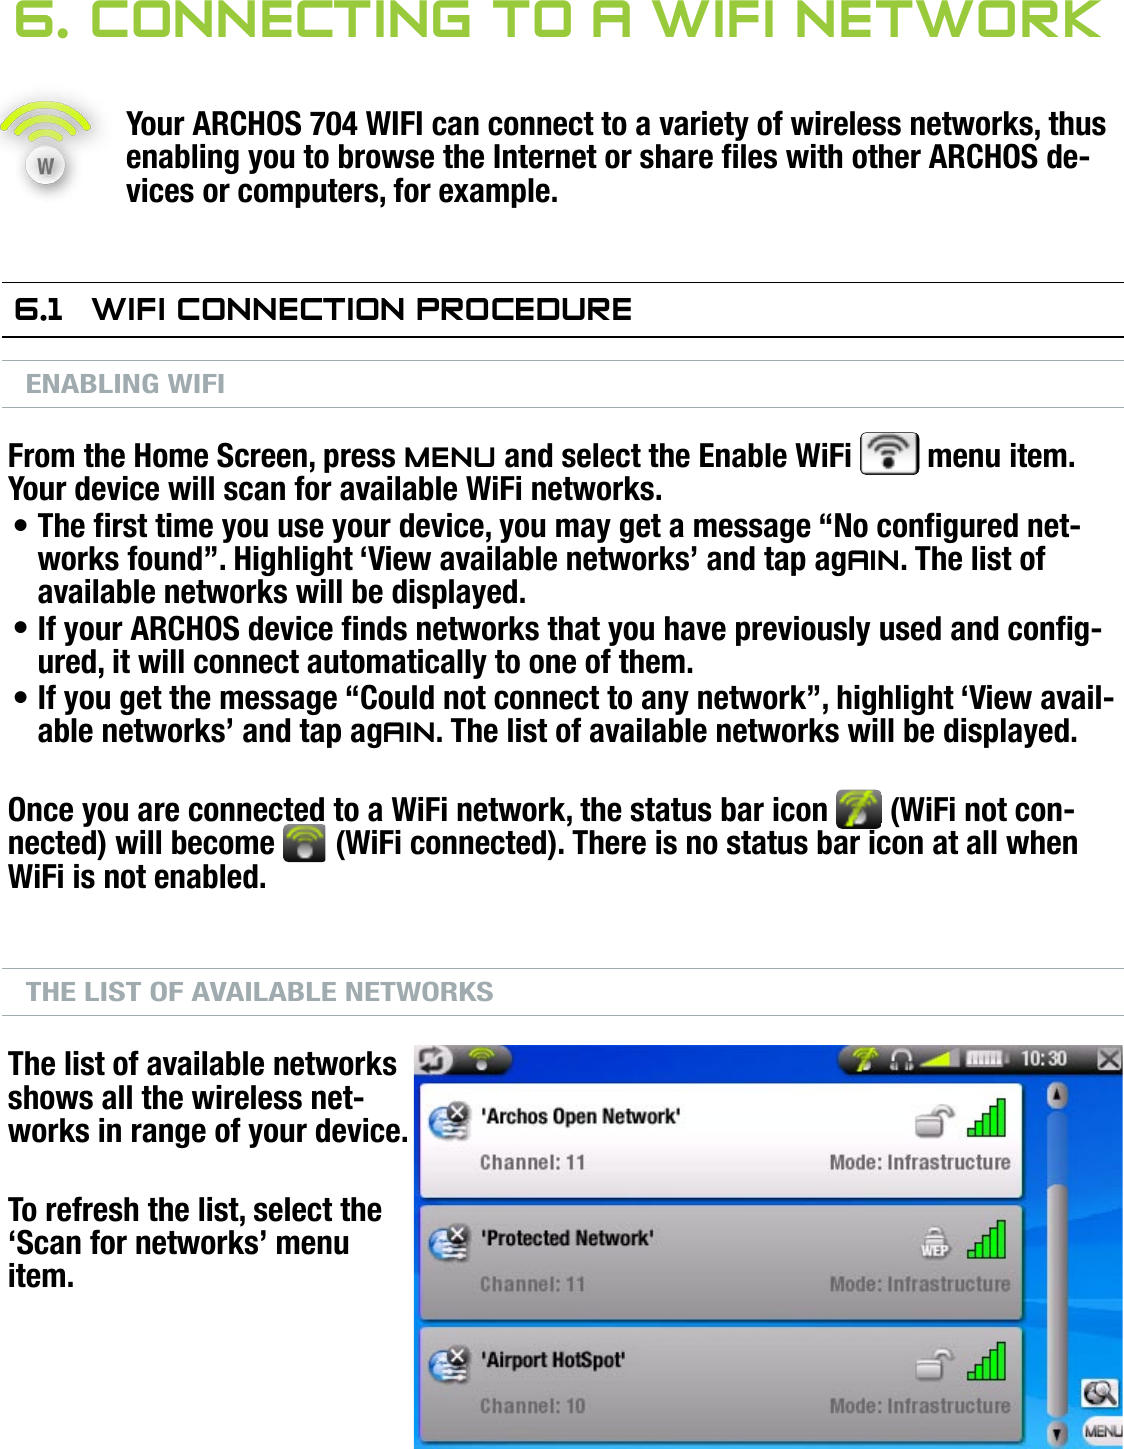 704MANUAL V0.0CONNECTING TO A WIFI NETWORK   &gt;   p. 376. COnneCTing TO a wifi neTwOrkYour ARCHOS 704 WIFI can connect to a variety of wireless networks, thus enabling you to browse the Internet or share les with other ARCHOS de-vices or computers, for example.6.1  wifi COnneCTiOn PrOCedureENABLING WIFIFrom the Home Screen, press Menu and select the Enable WiFi   menu item. Your device will scan for available WiFi networks.The rst time you use your device, you may get a message “No congured net-works found”. Highlight ‘View available networks’ and tap again. The list of available networks will be displayed.If your ARCHOS device nds networks that you have previously used and cong-ured, it will connect automatically to one of them.If you get the message “Could not connect to any network”, highlight ‘View avail-able networks’ and tap again. The list of available networks will be displayed.Once you are connected to a WiFi network, the status bar icon   (WiFi not con-nected) will become   (WiFi connected). There is no status bar icon at all when WiFi is not enabled.THE LIST OF AVAILABLE NETWORKSThe list of available networks shows all the wireless net-works in range of your device.To refresh the list, select the ‘Scan for networks’ menu item.•••